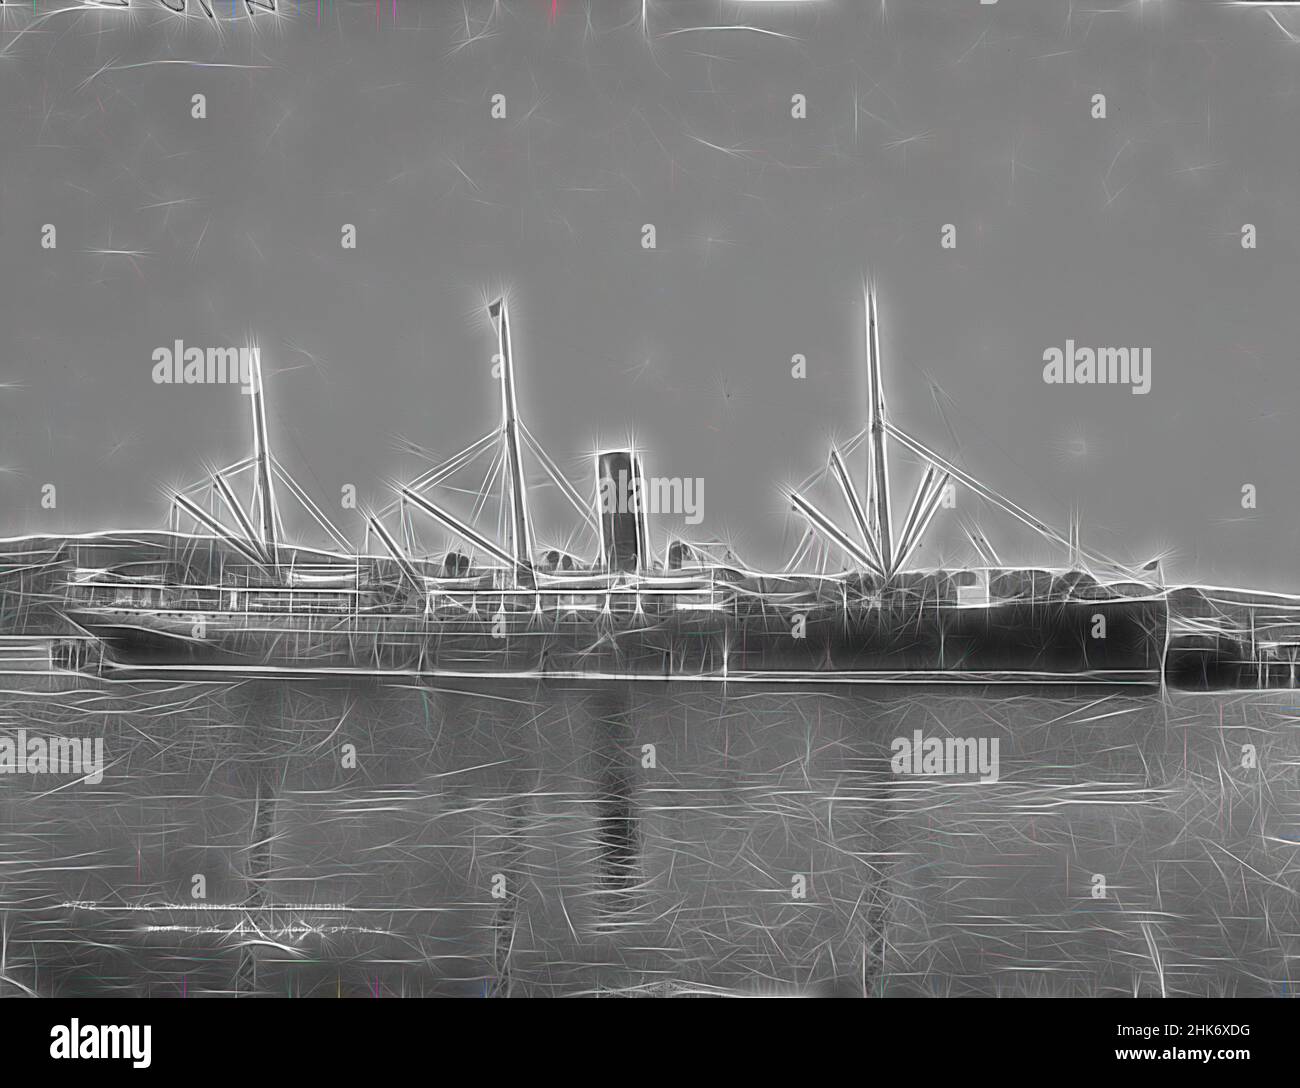 Inspired by U.S.S. Warrimoo at Dunedin, Muir & Moodie studio, photography studio, New Zealand, black-and-white photography, Boat is Union Steam Ship Co's Warrimoo, Reimagined by Artotop. Classic art reinvented with a modern twist. Design of warm cheerful glowing of brightness and light ray radiance. Photography inspired by surrealism and futurism, embracing dynamic energy of modern technology, movement, speed and revolutionize culture Stock Photo